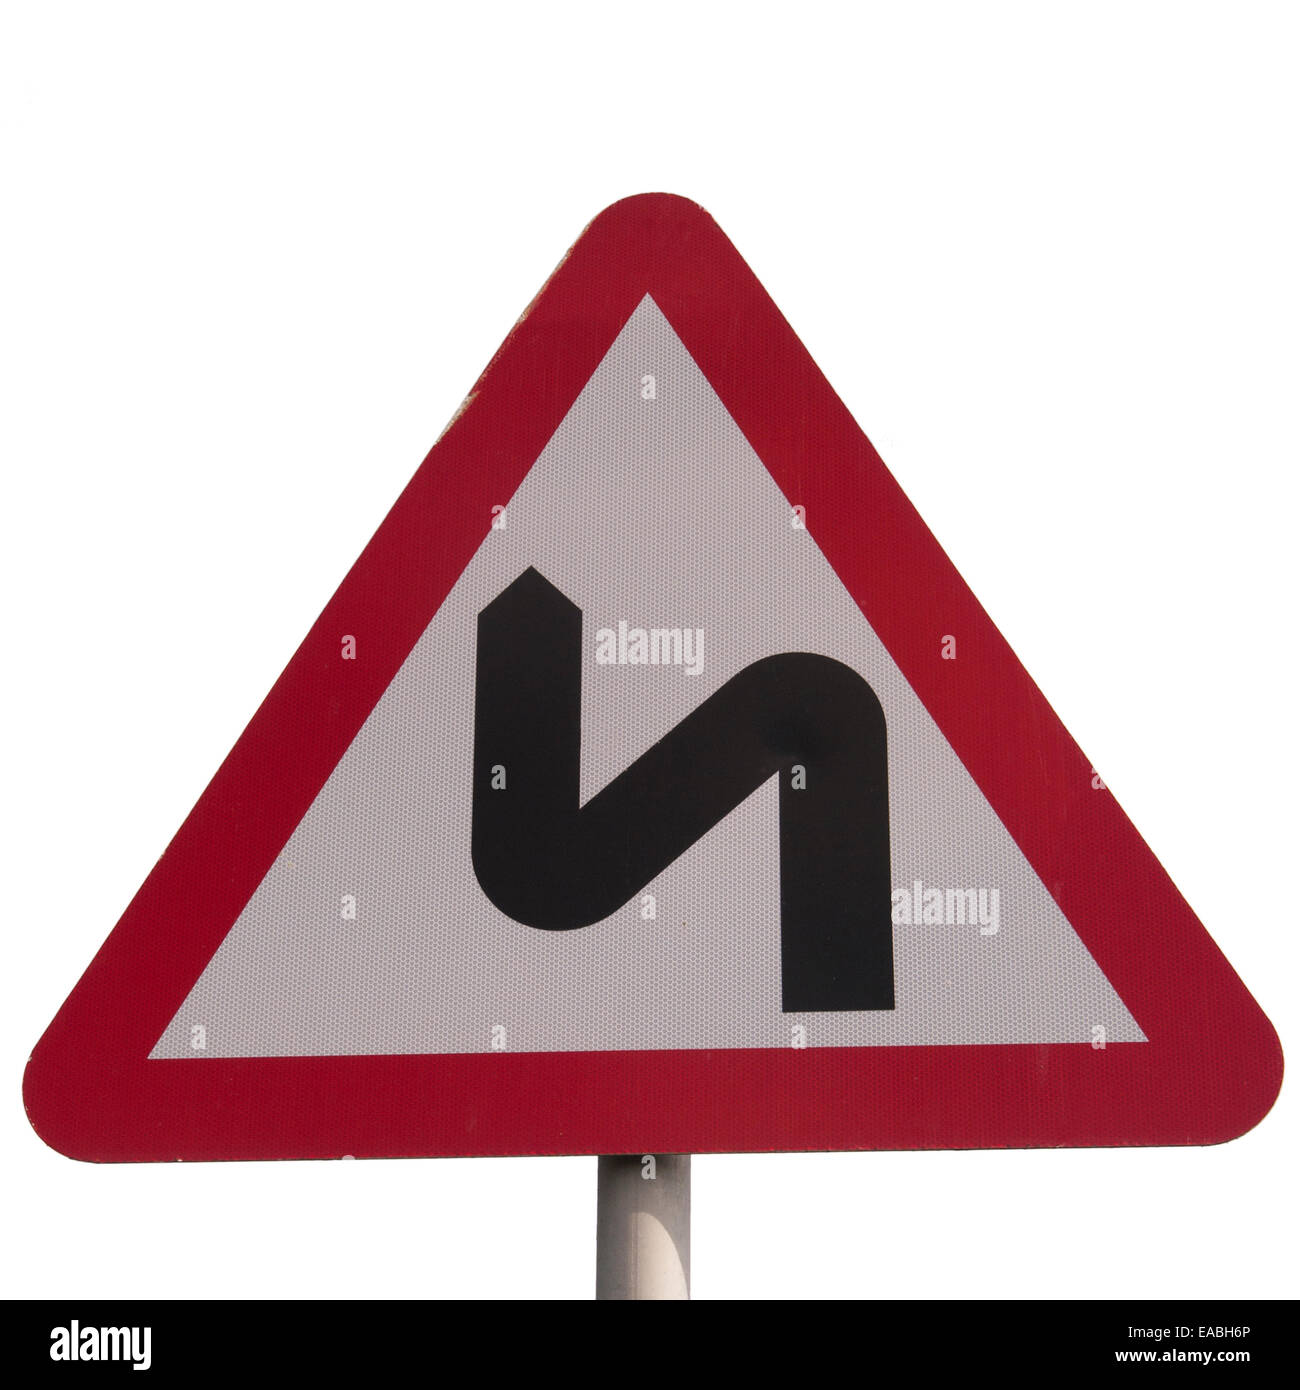 Uk Road Sign Series Of Bends Stock Photo